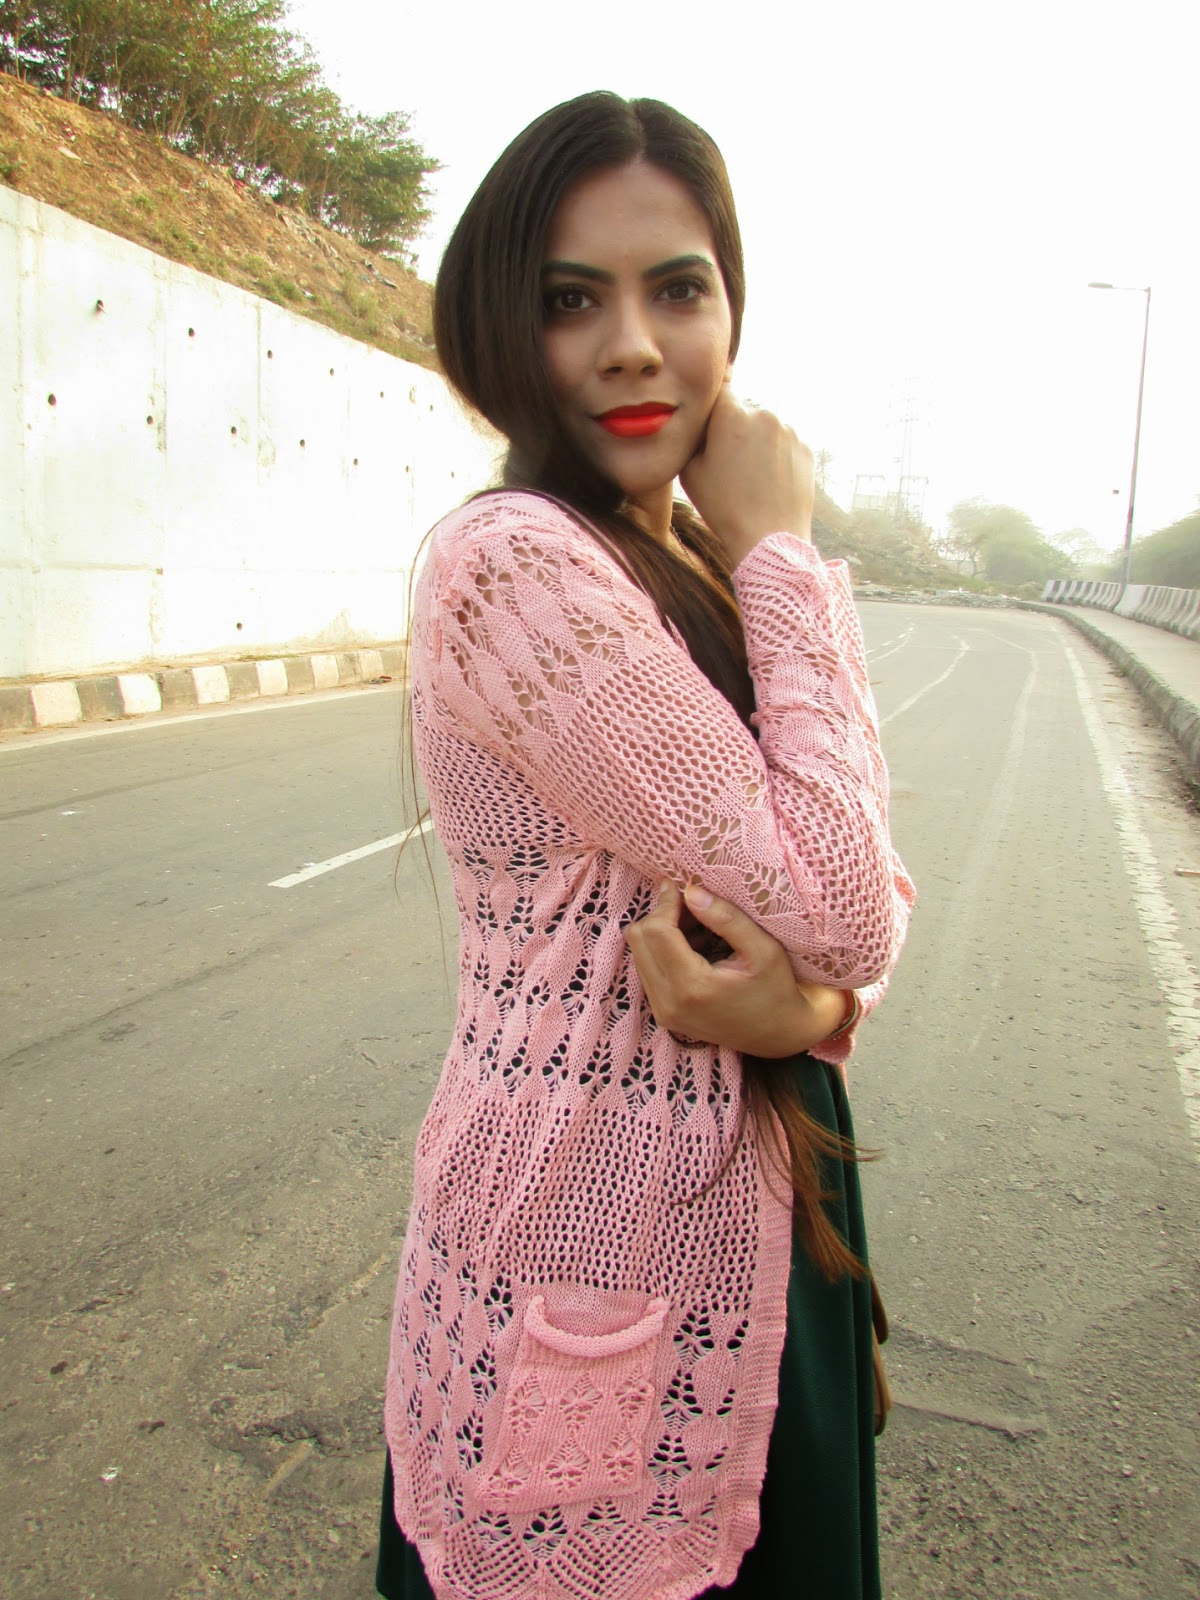 long cardigan, long cardigan online, pink long cardigan, long cardigan online, fashion, winter ootd, echopaul, echopaul review, how to style long cardigan, red lips,beauty , fashion,beauty and fashion,beauty blog, fashion blog , indian beauty blog,indian fashion blog, beauty and fashion blog, indian beauty and fashion blog, indian bloggers, indian beauty bloggers, indian fashion bloggers,indian bloggers online, top 10 indian bloggers, top indian bloggers,top 10 fashion bloggers, indian bloggers on blogspot,home remedies, how to